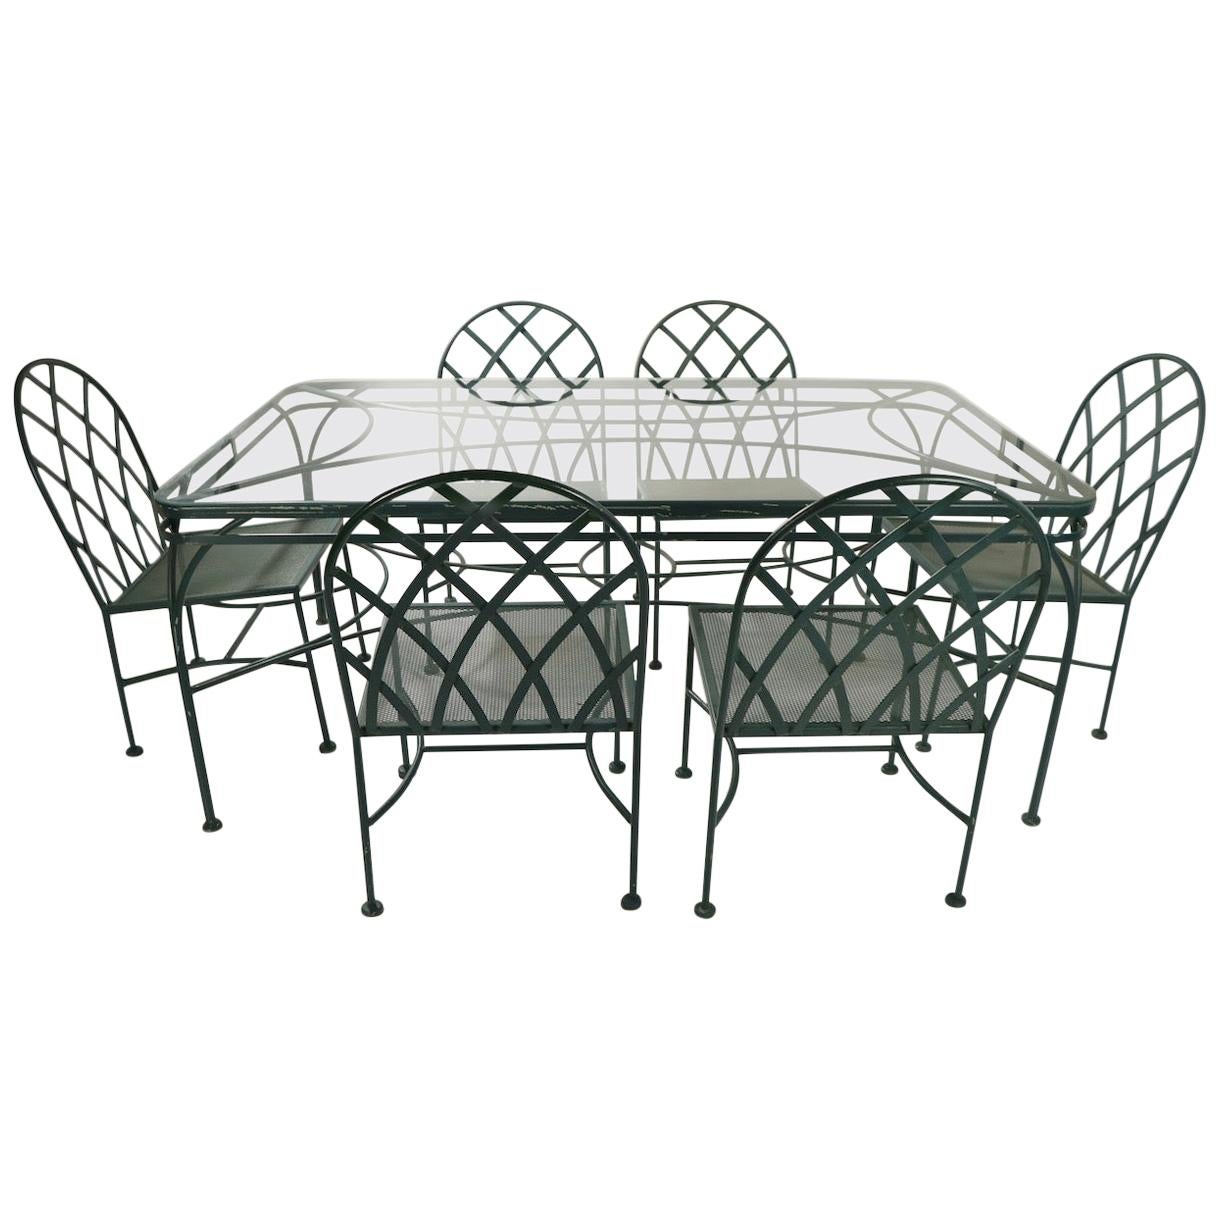 7 Piece Glass Top Patio Dining Set after Shaver Howard